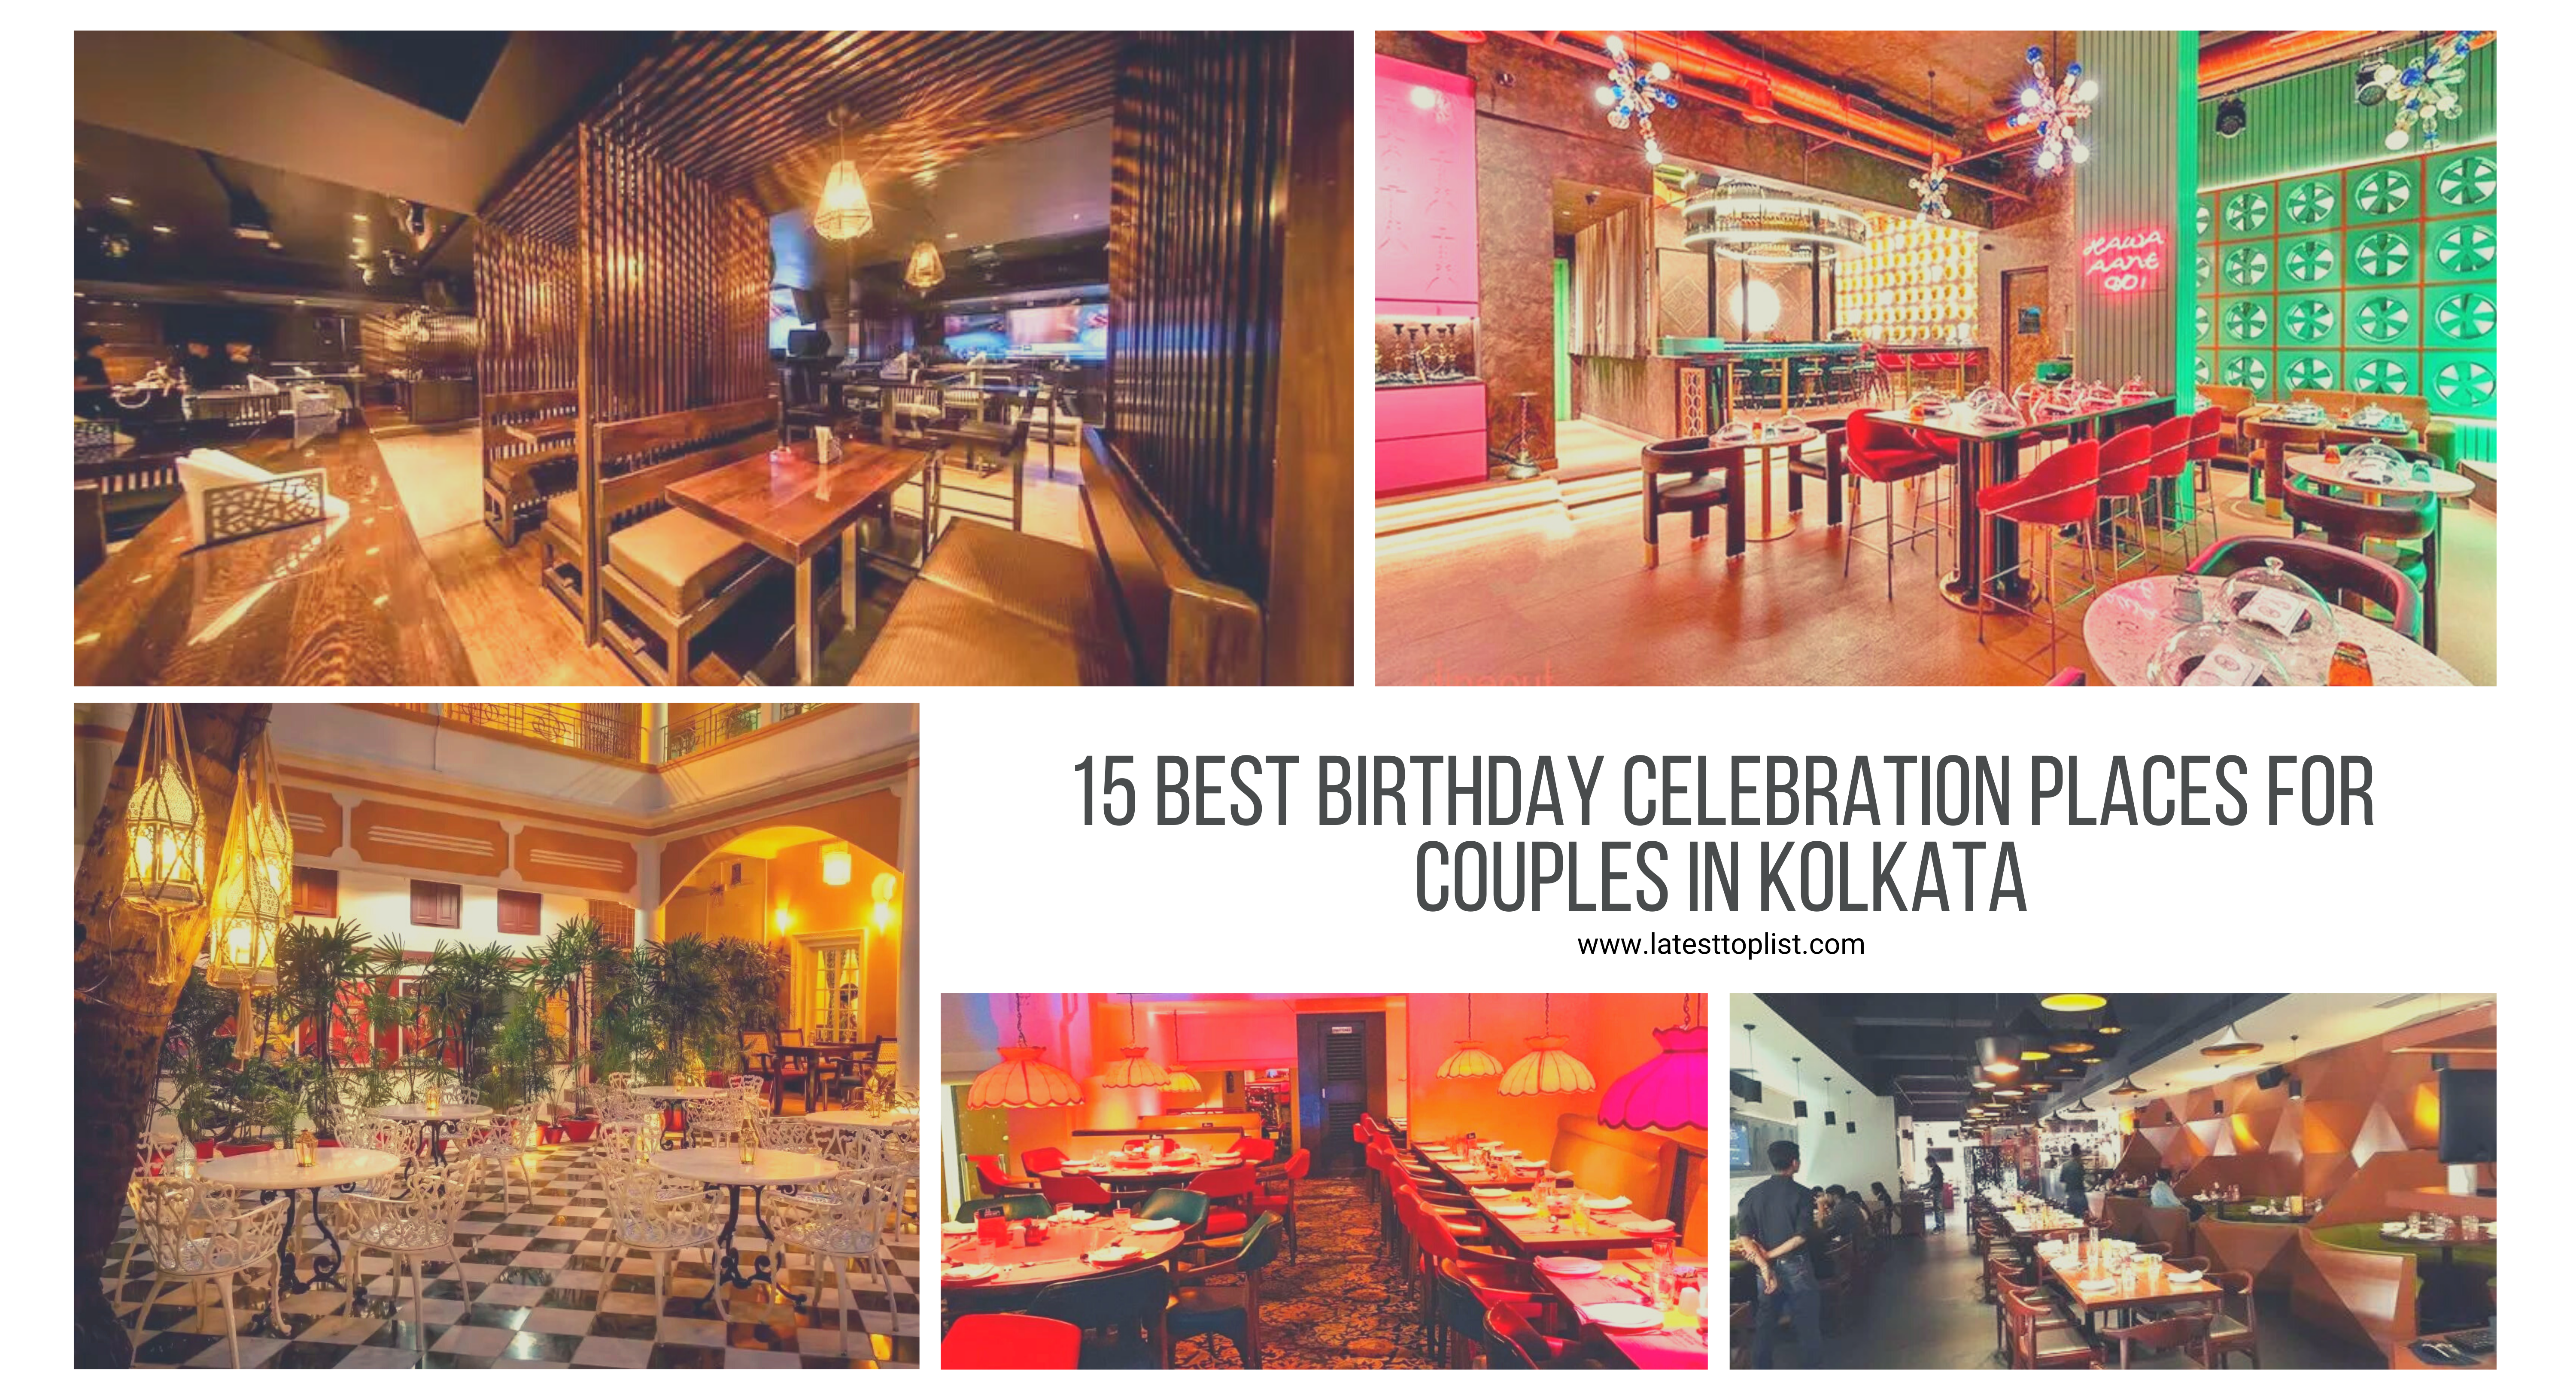 15 Best Birthday Celebration Places For Couples In Kolkata